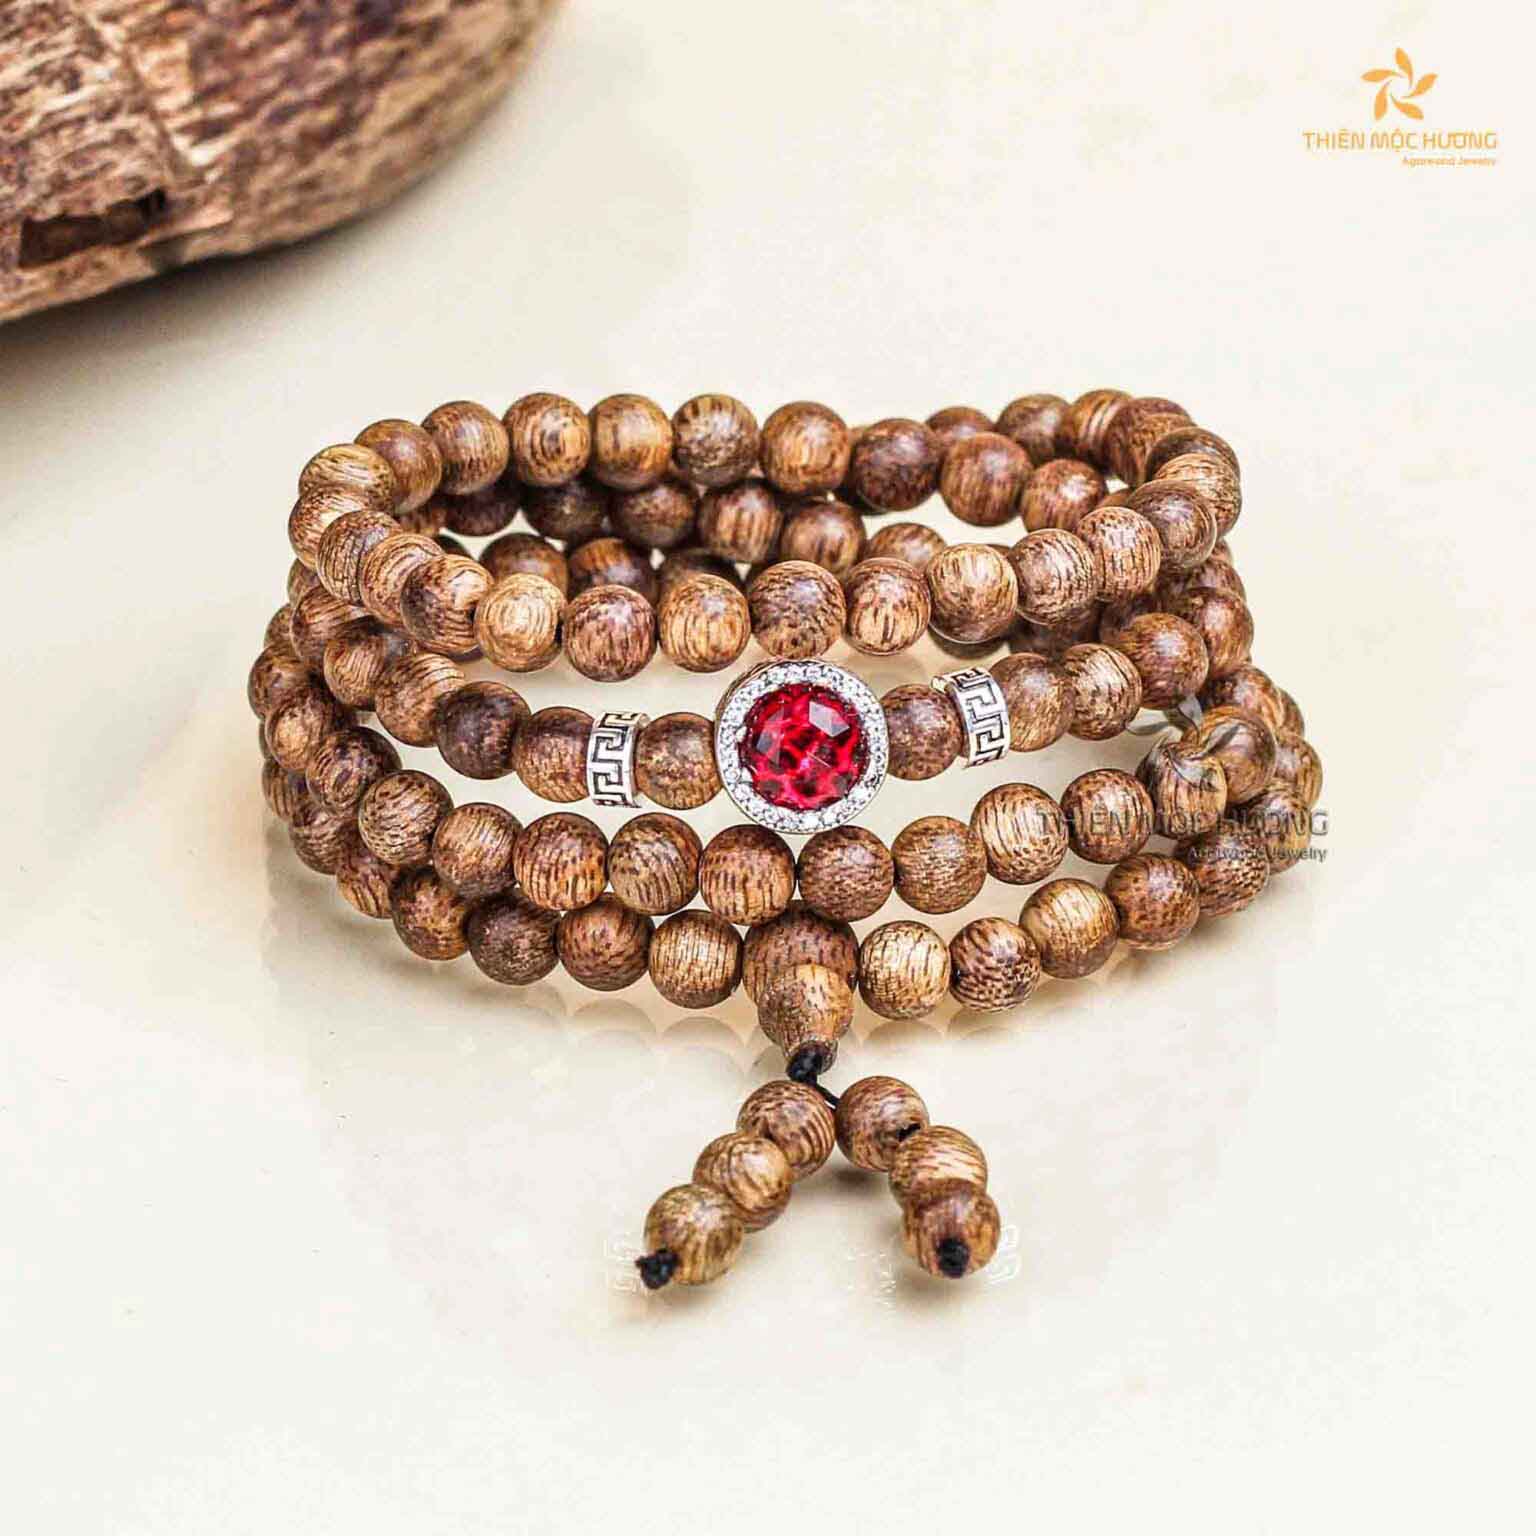 bracelet made from 108 seeds has a gentle, faint aroma